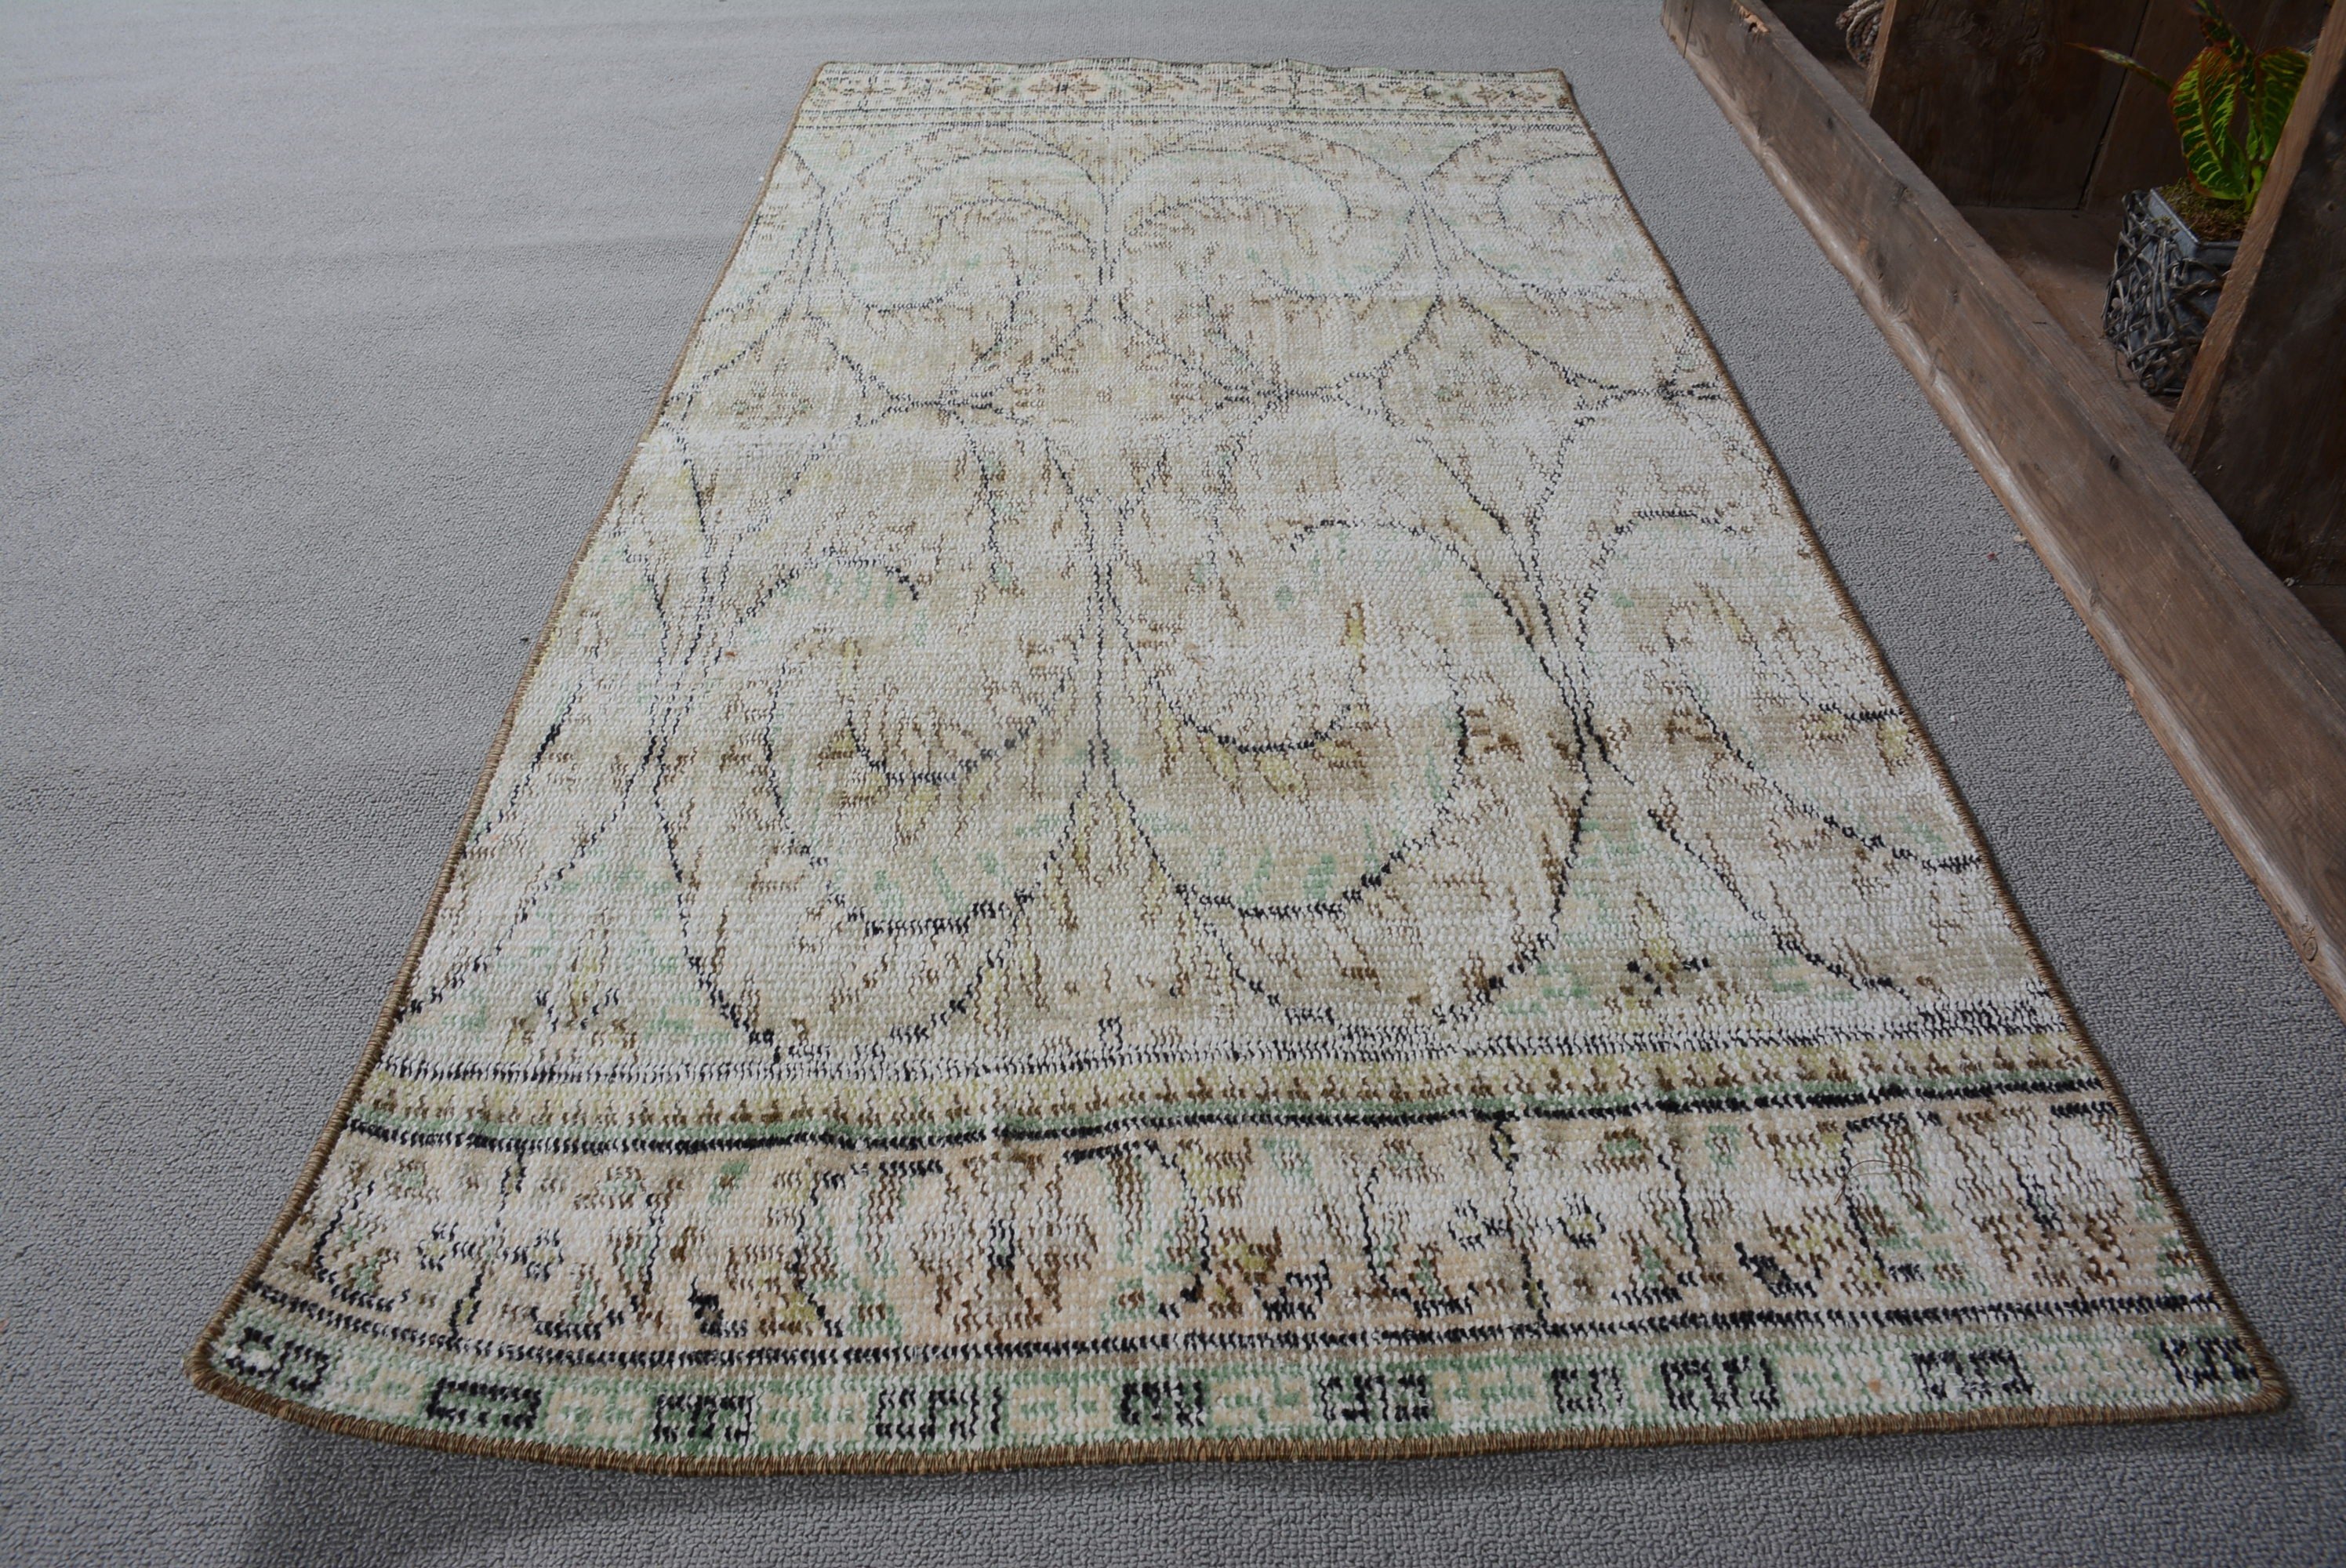 2.3x4.8 ft Small Rug, Entry Rug, Turkish Rug, Floor Rugs, Cool Rug, Vintage Rugs, Car Mat Rug, Rugs for Wall Hanging, Green Antique Rug